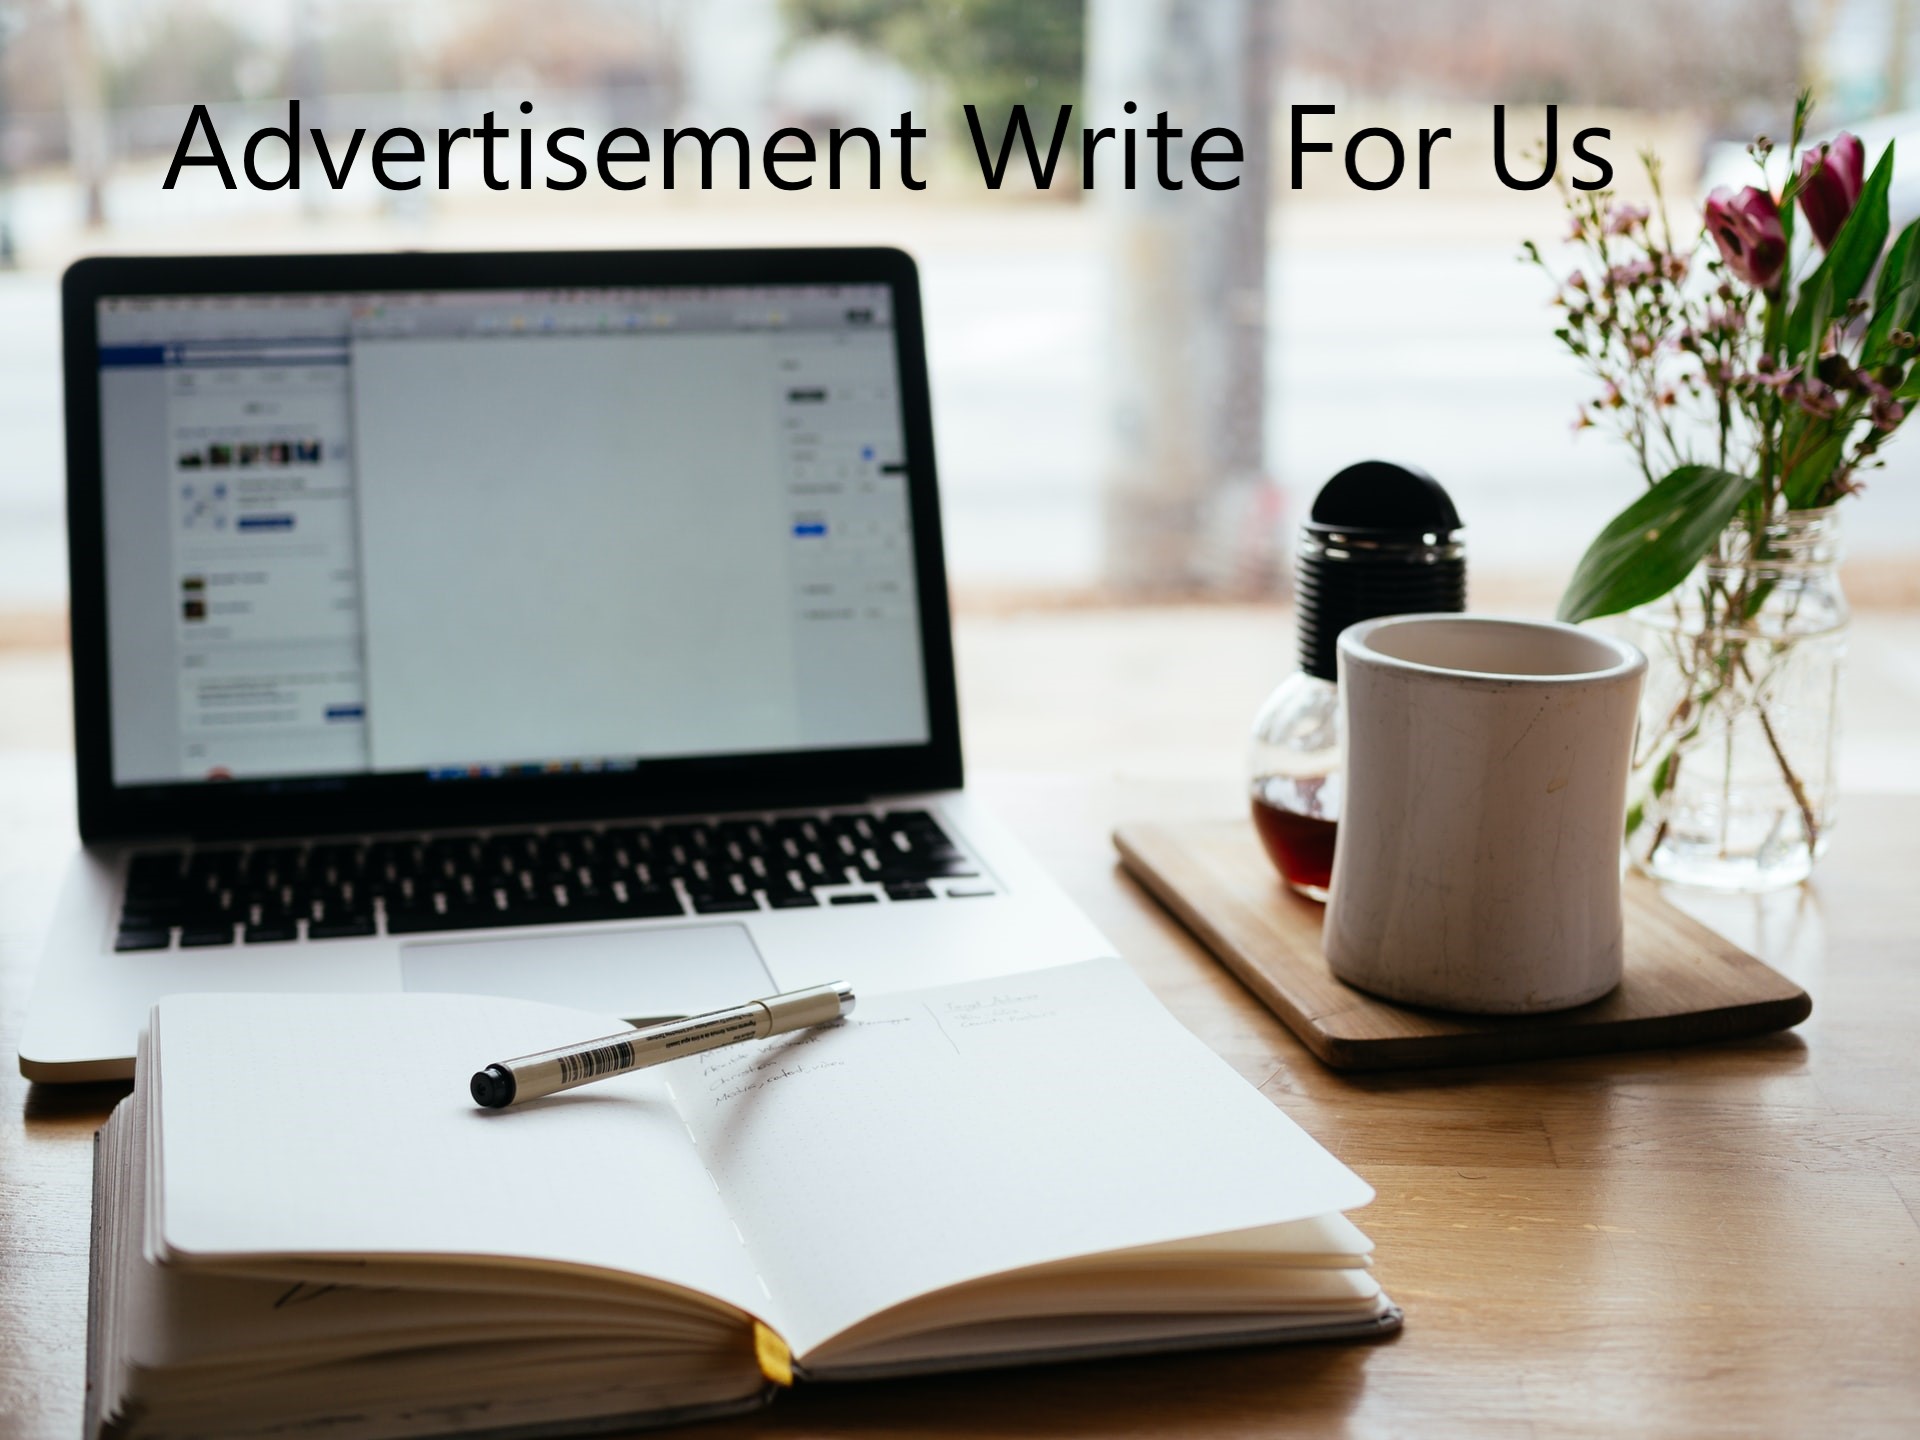 advertisement write for us